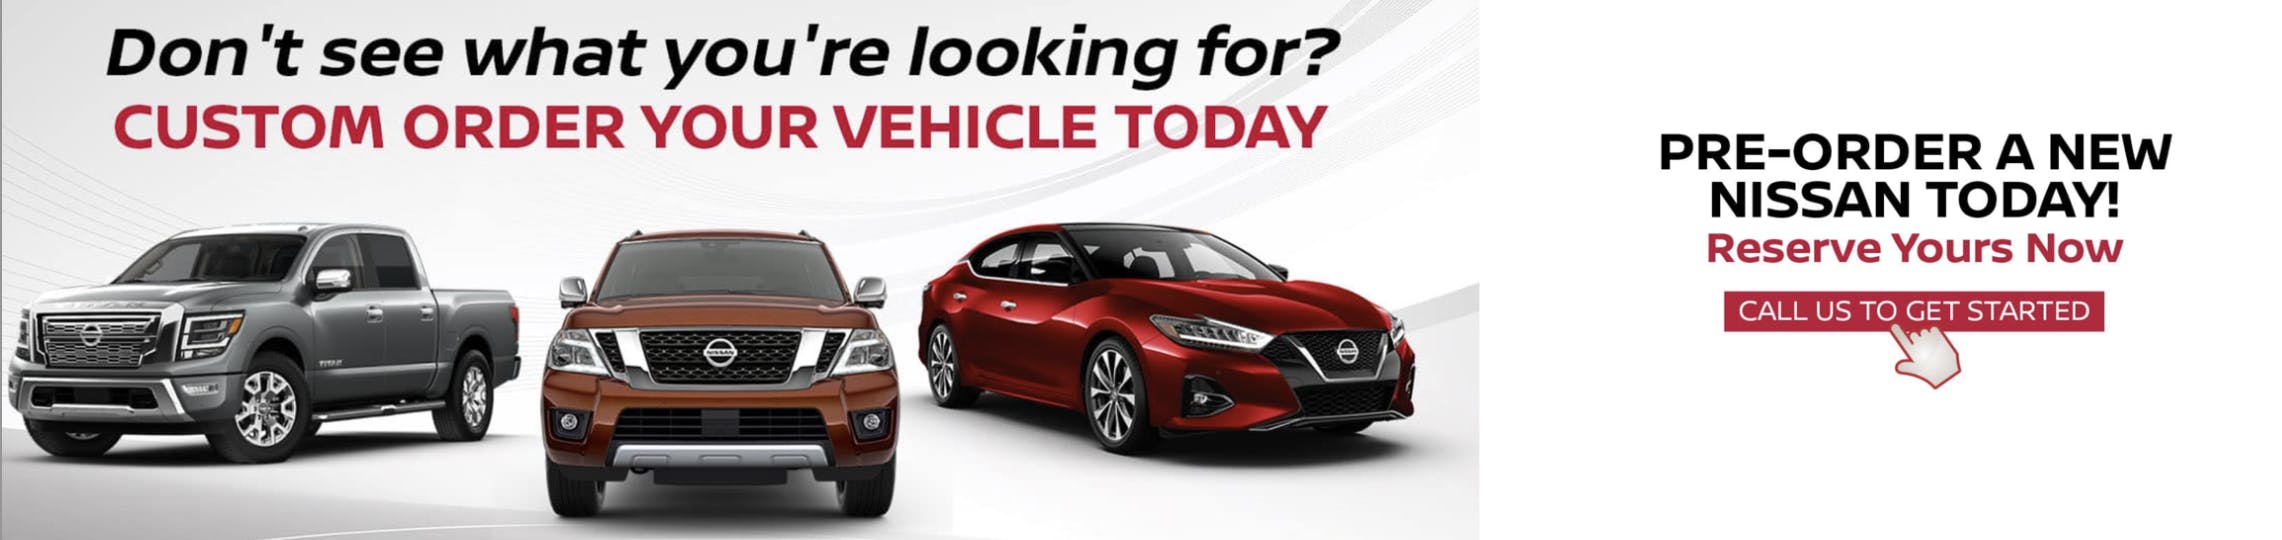 reserve custom order nissan near plymouth ma at Sullivan brothers nissan